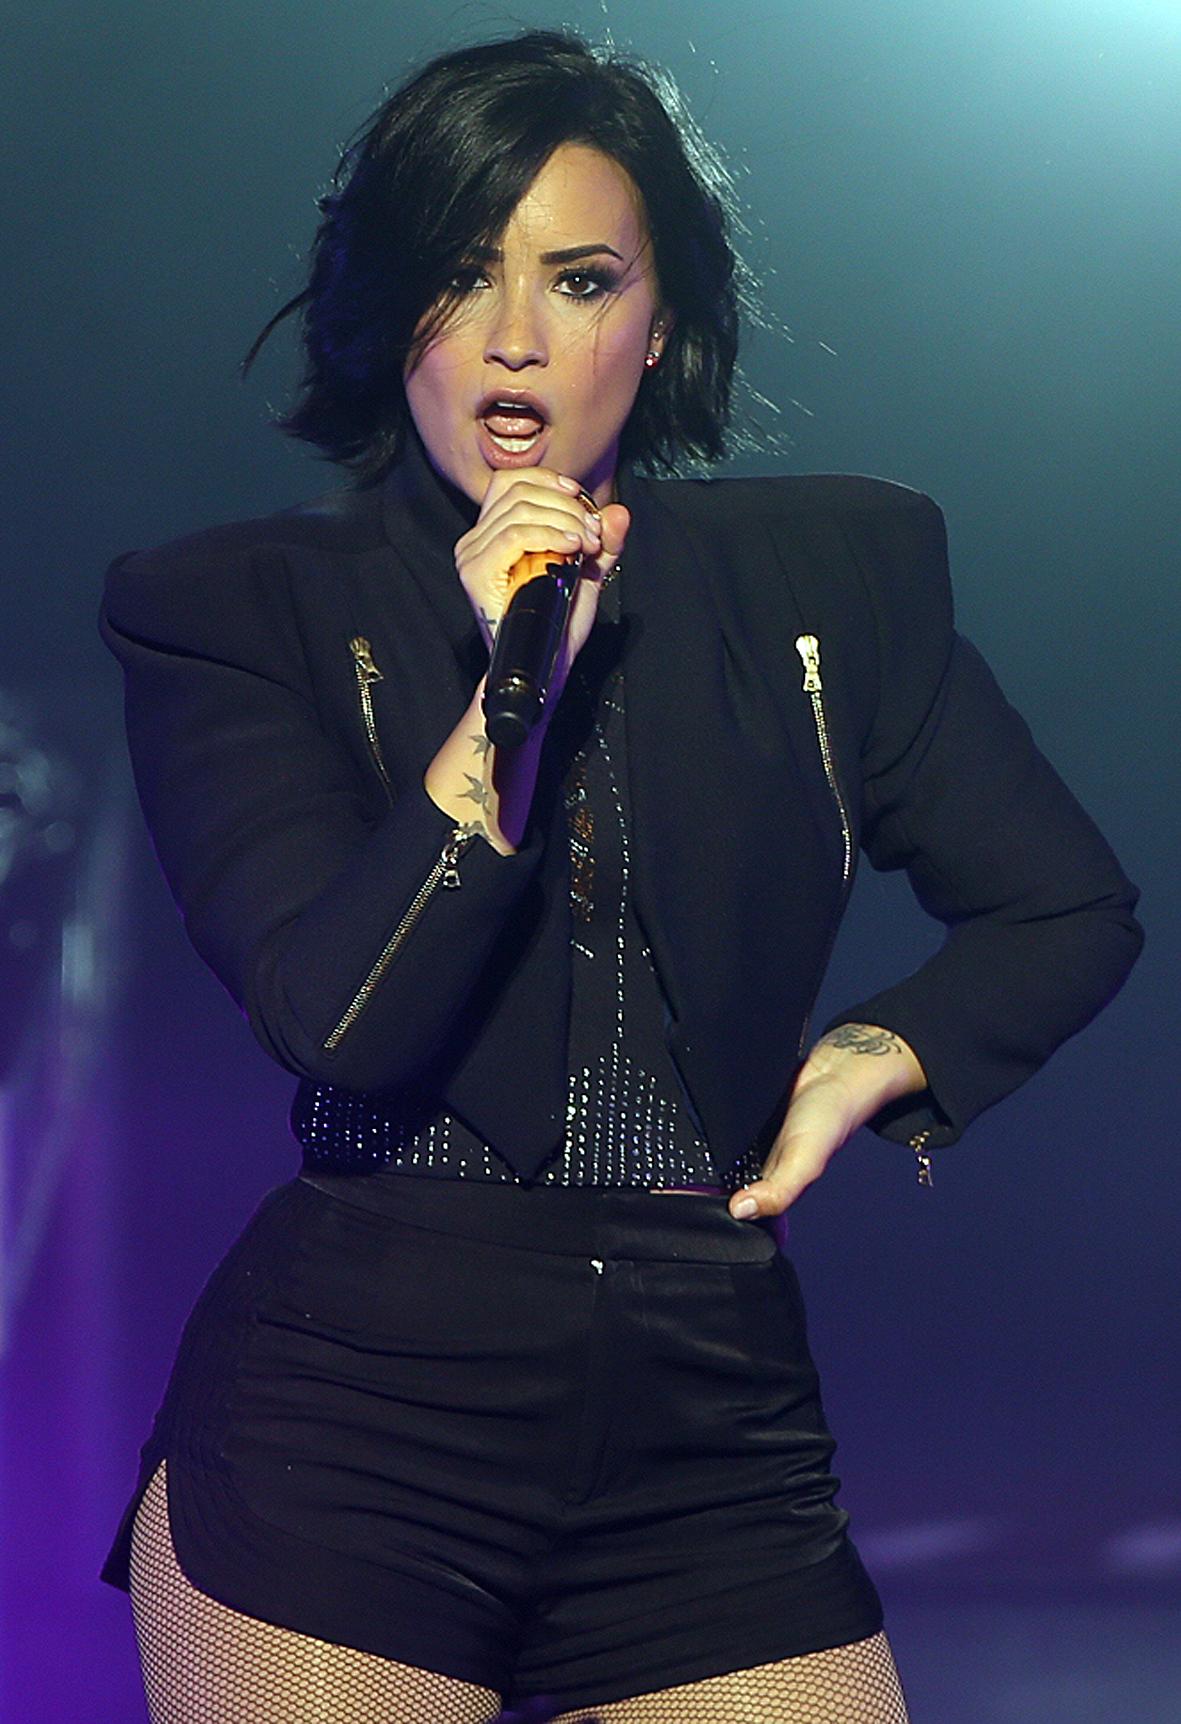 Demi Lovato performing at the Crowne Theatre